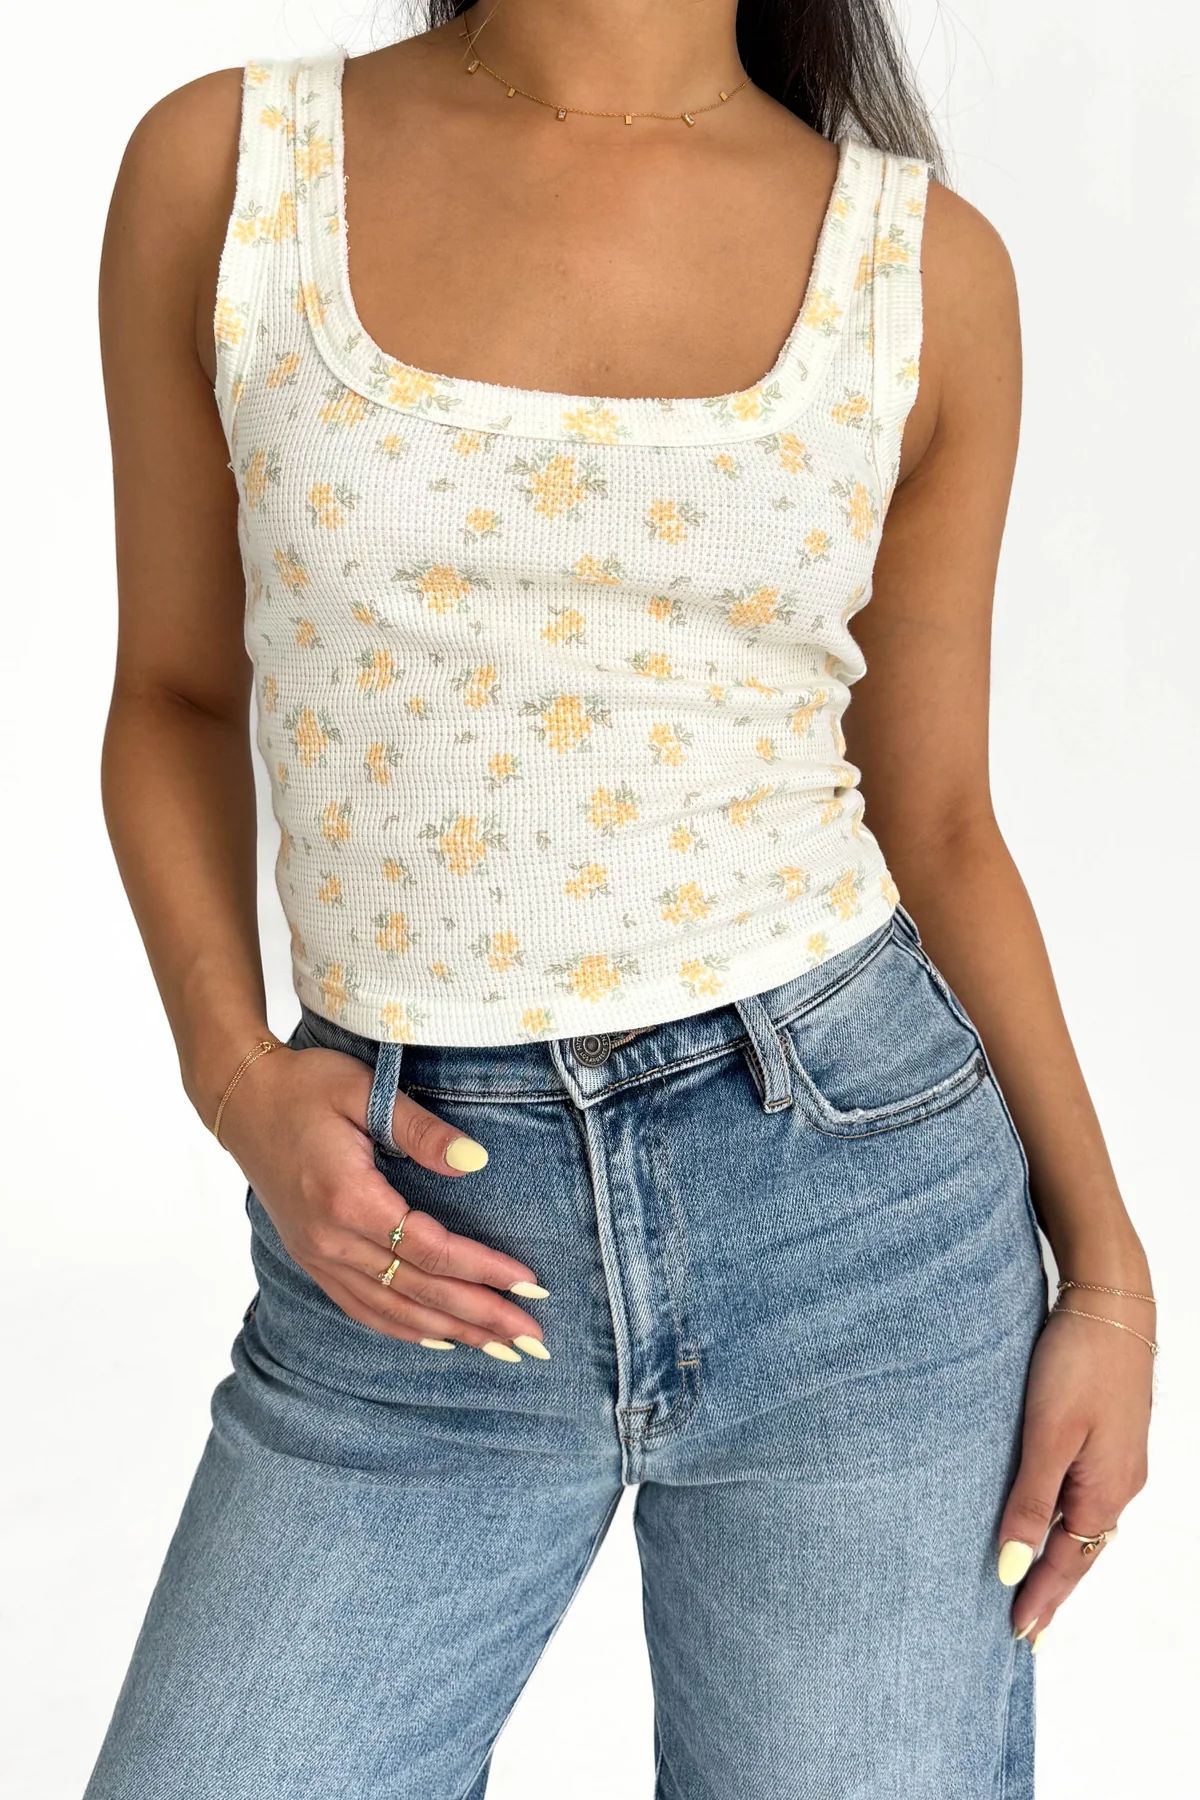 Daisy Tank in Yellow Floral | Grey Bandit